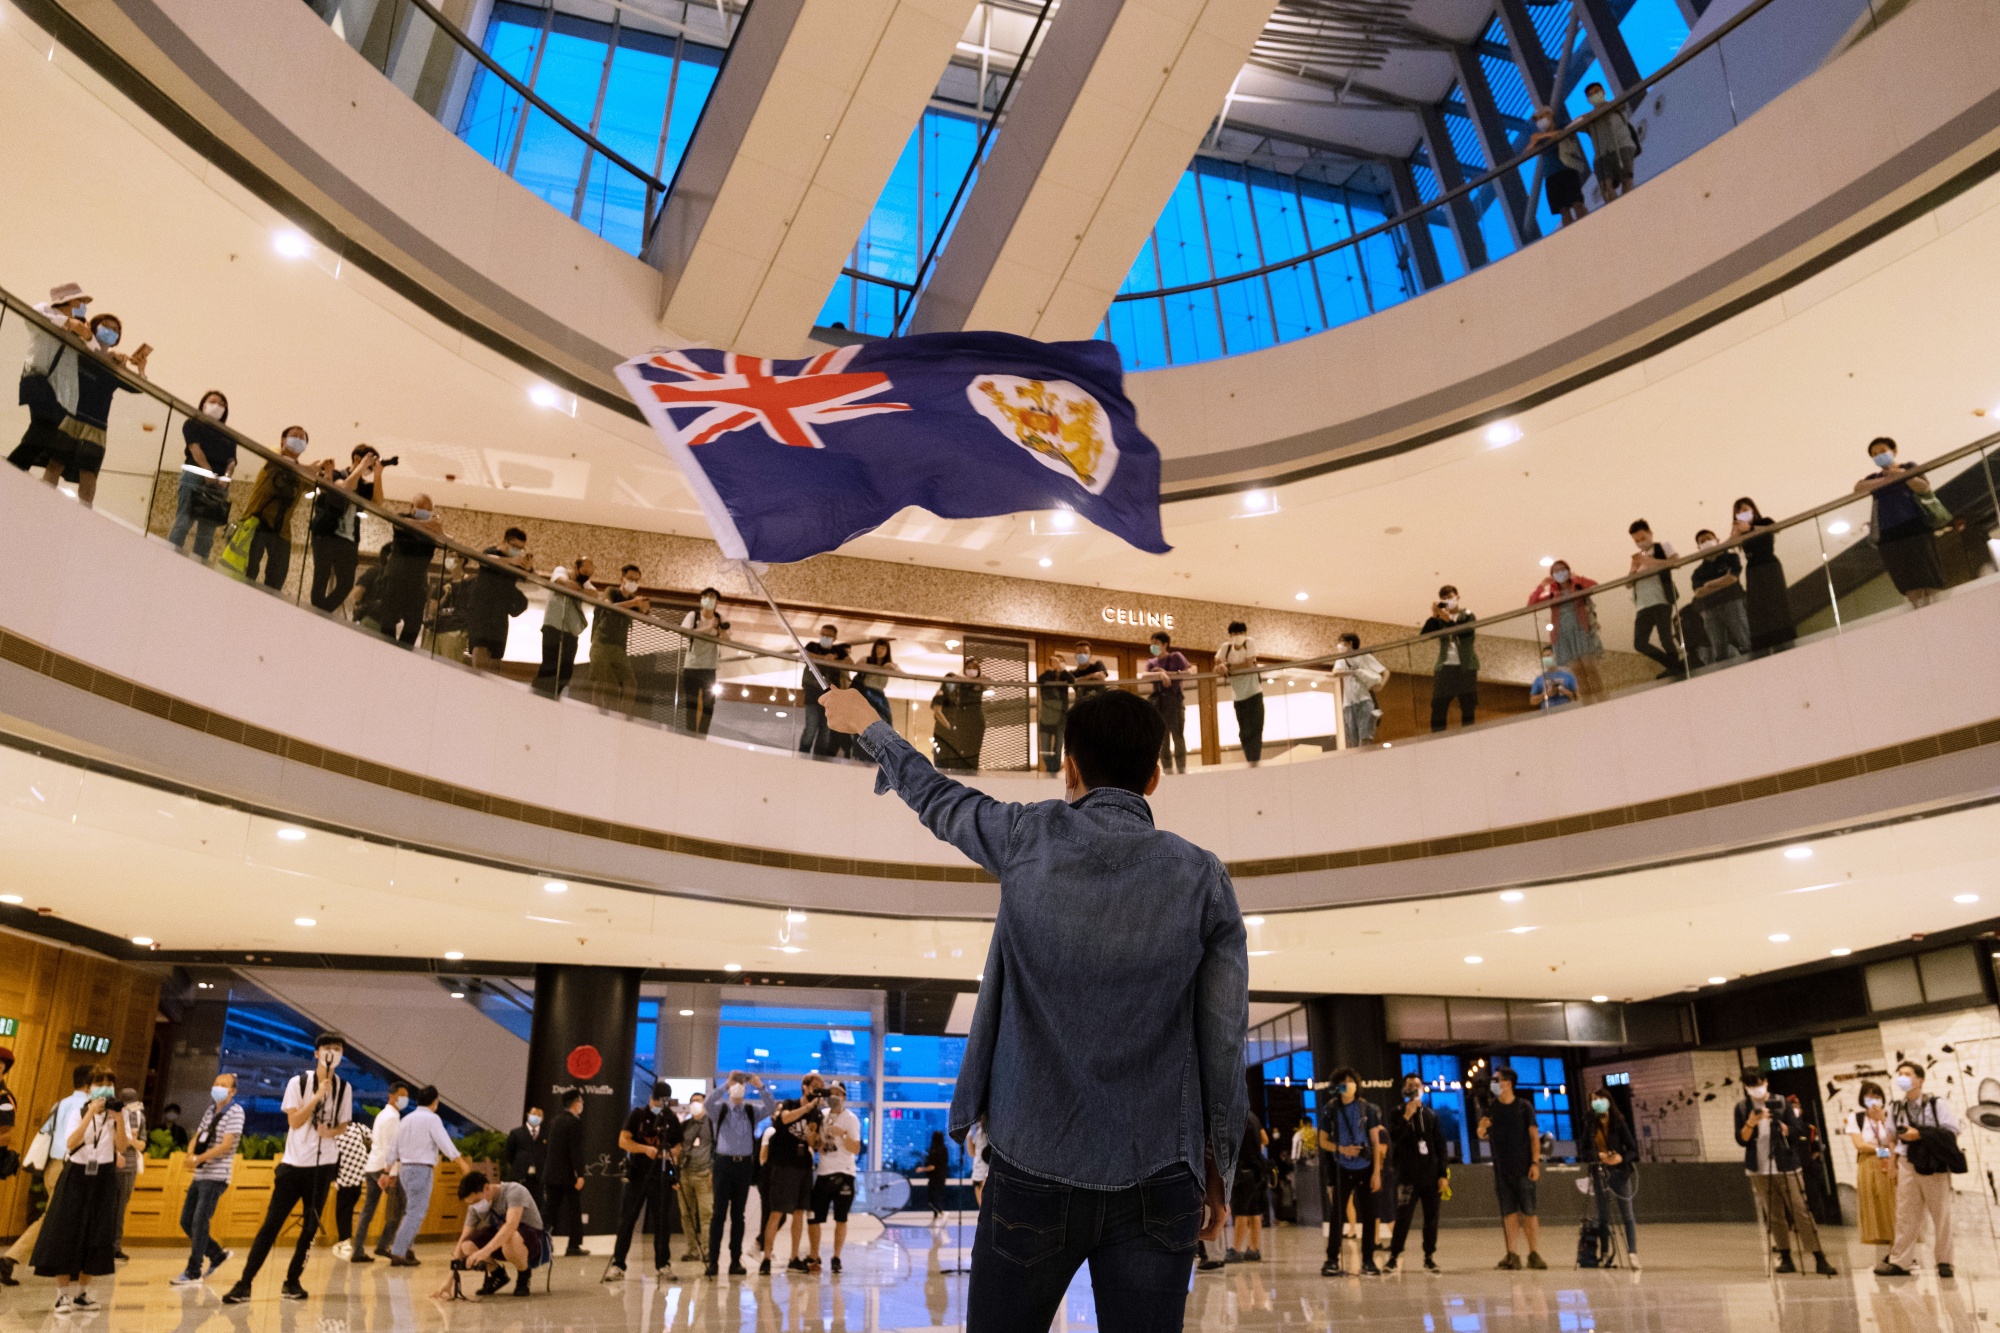 A demonstrator waves a colonial-era Hong Kong flag during a protest against a planned national security law held in the International Finance Center shopping mall in Hong Kong, on May 25.